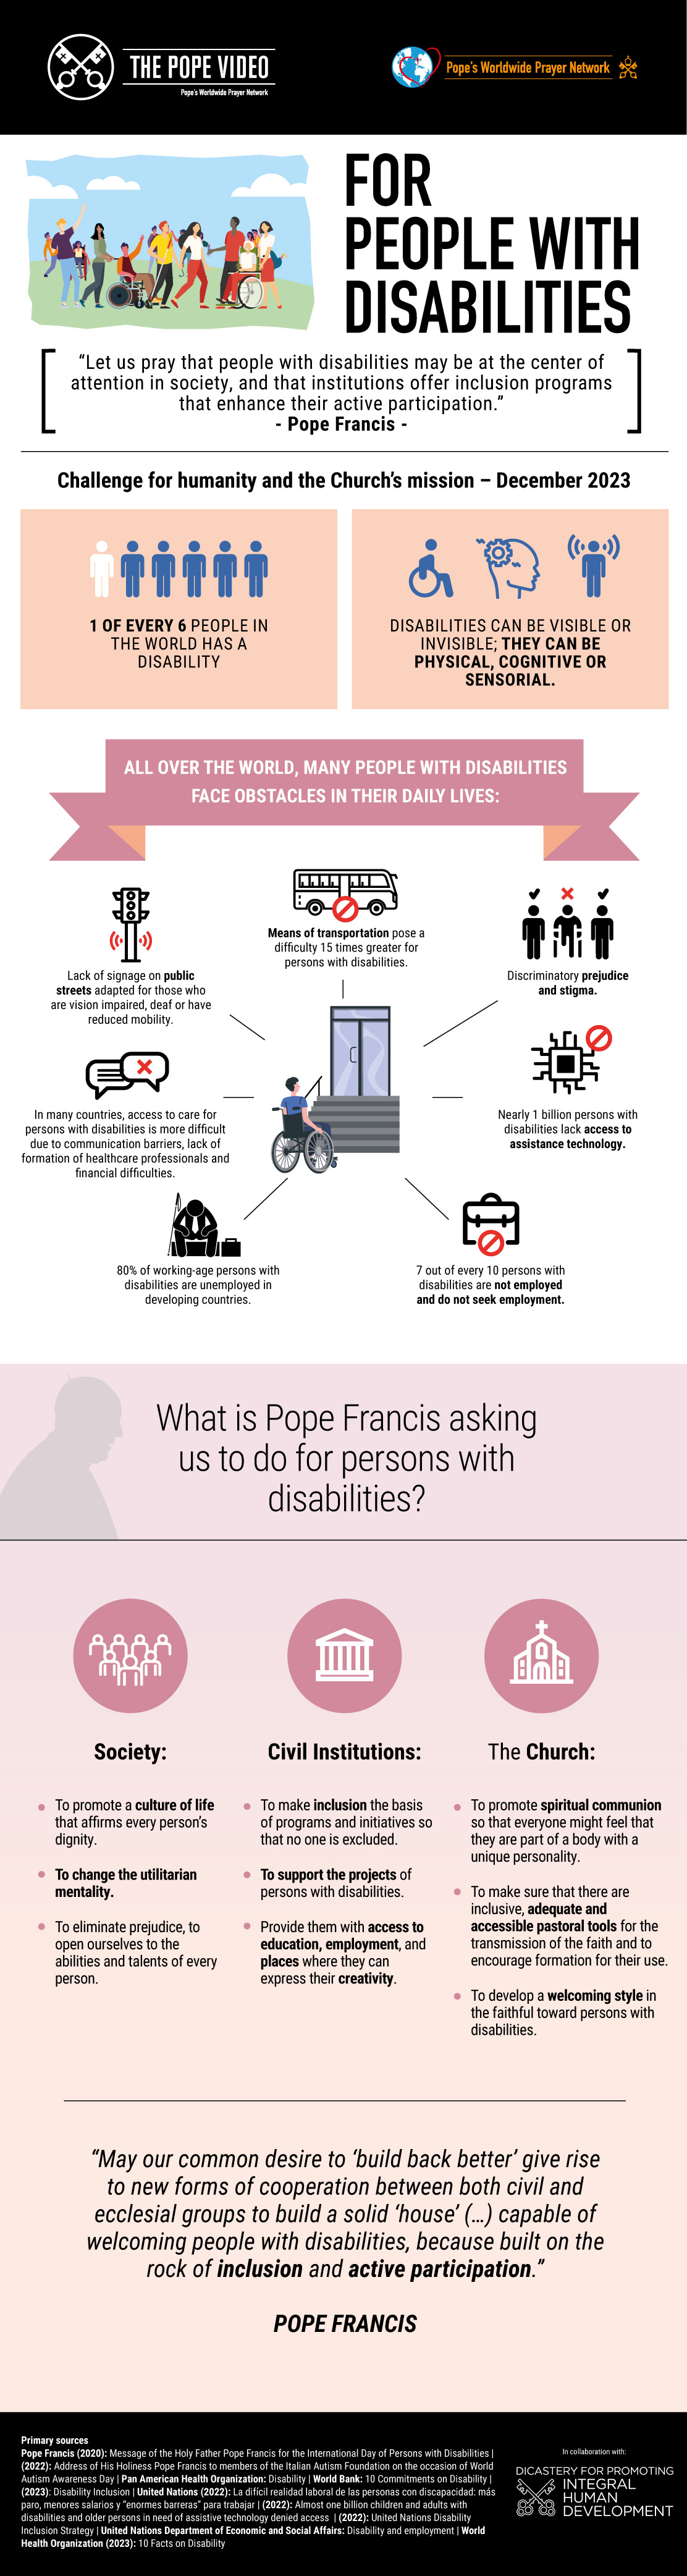 The Pope Video - For people with disabilities